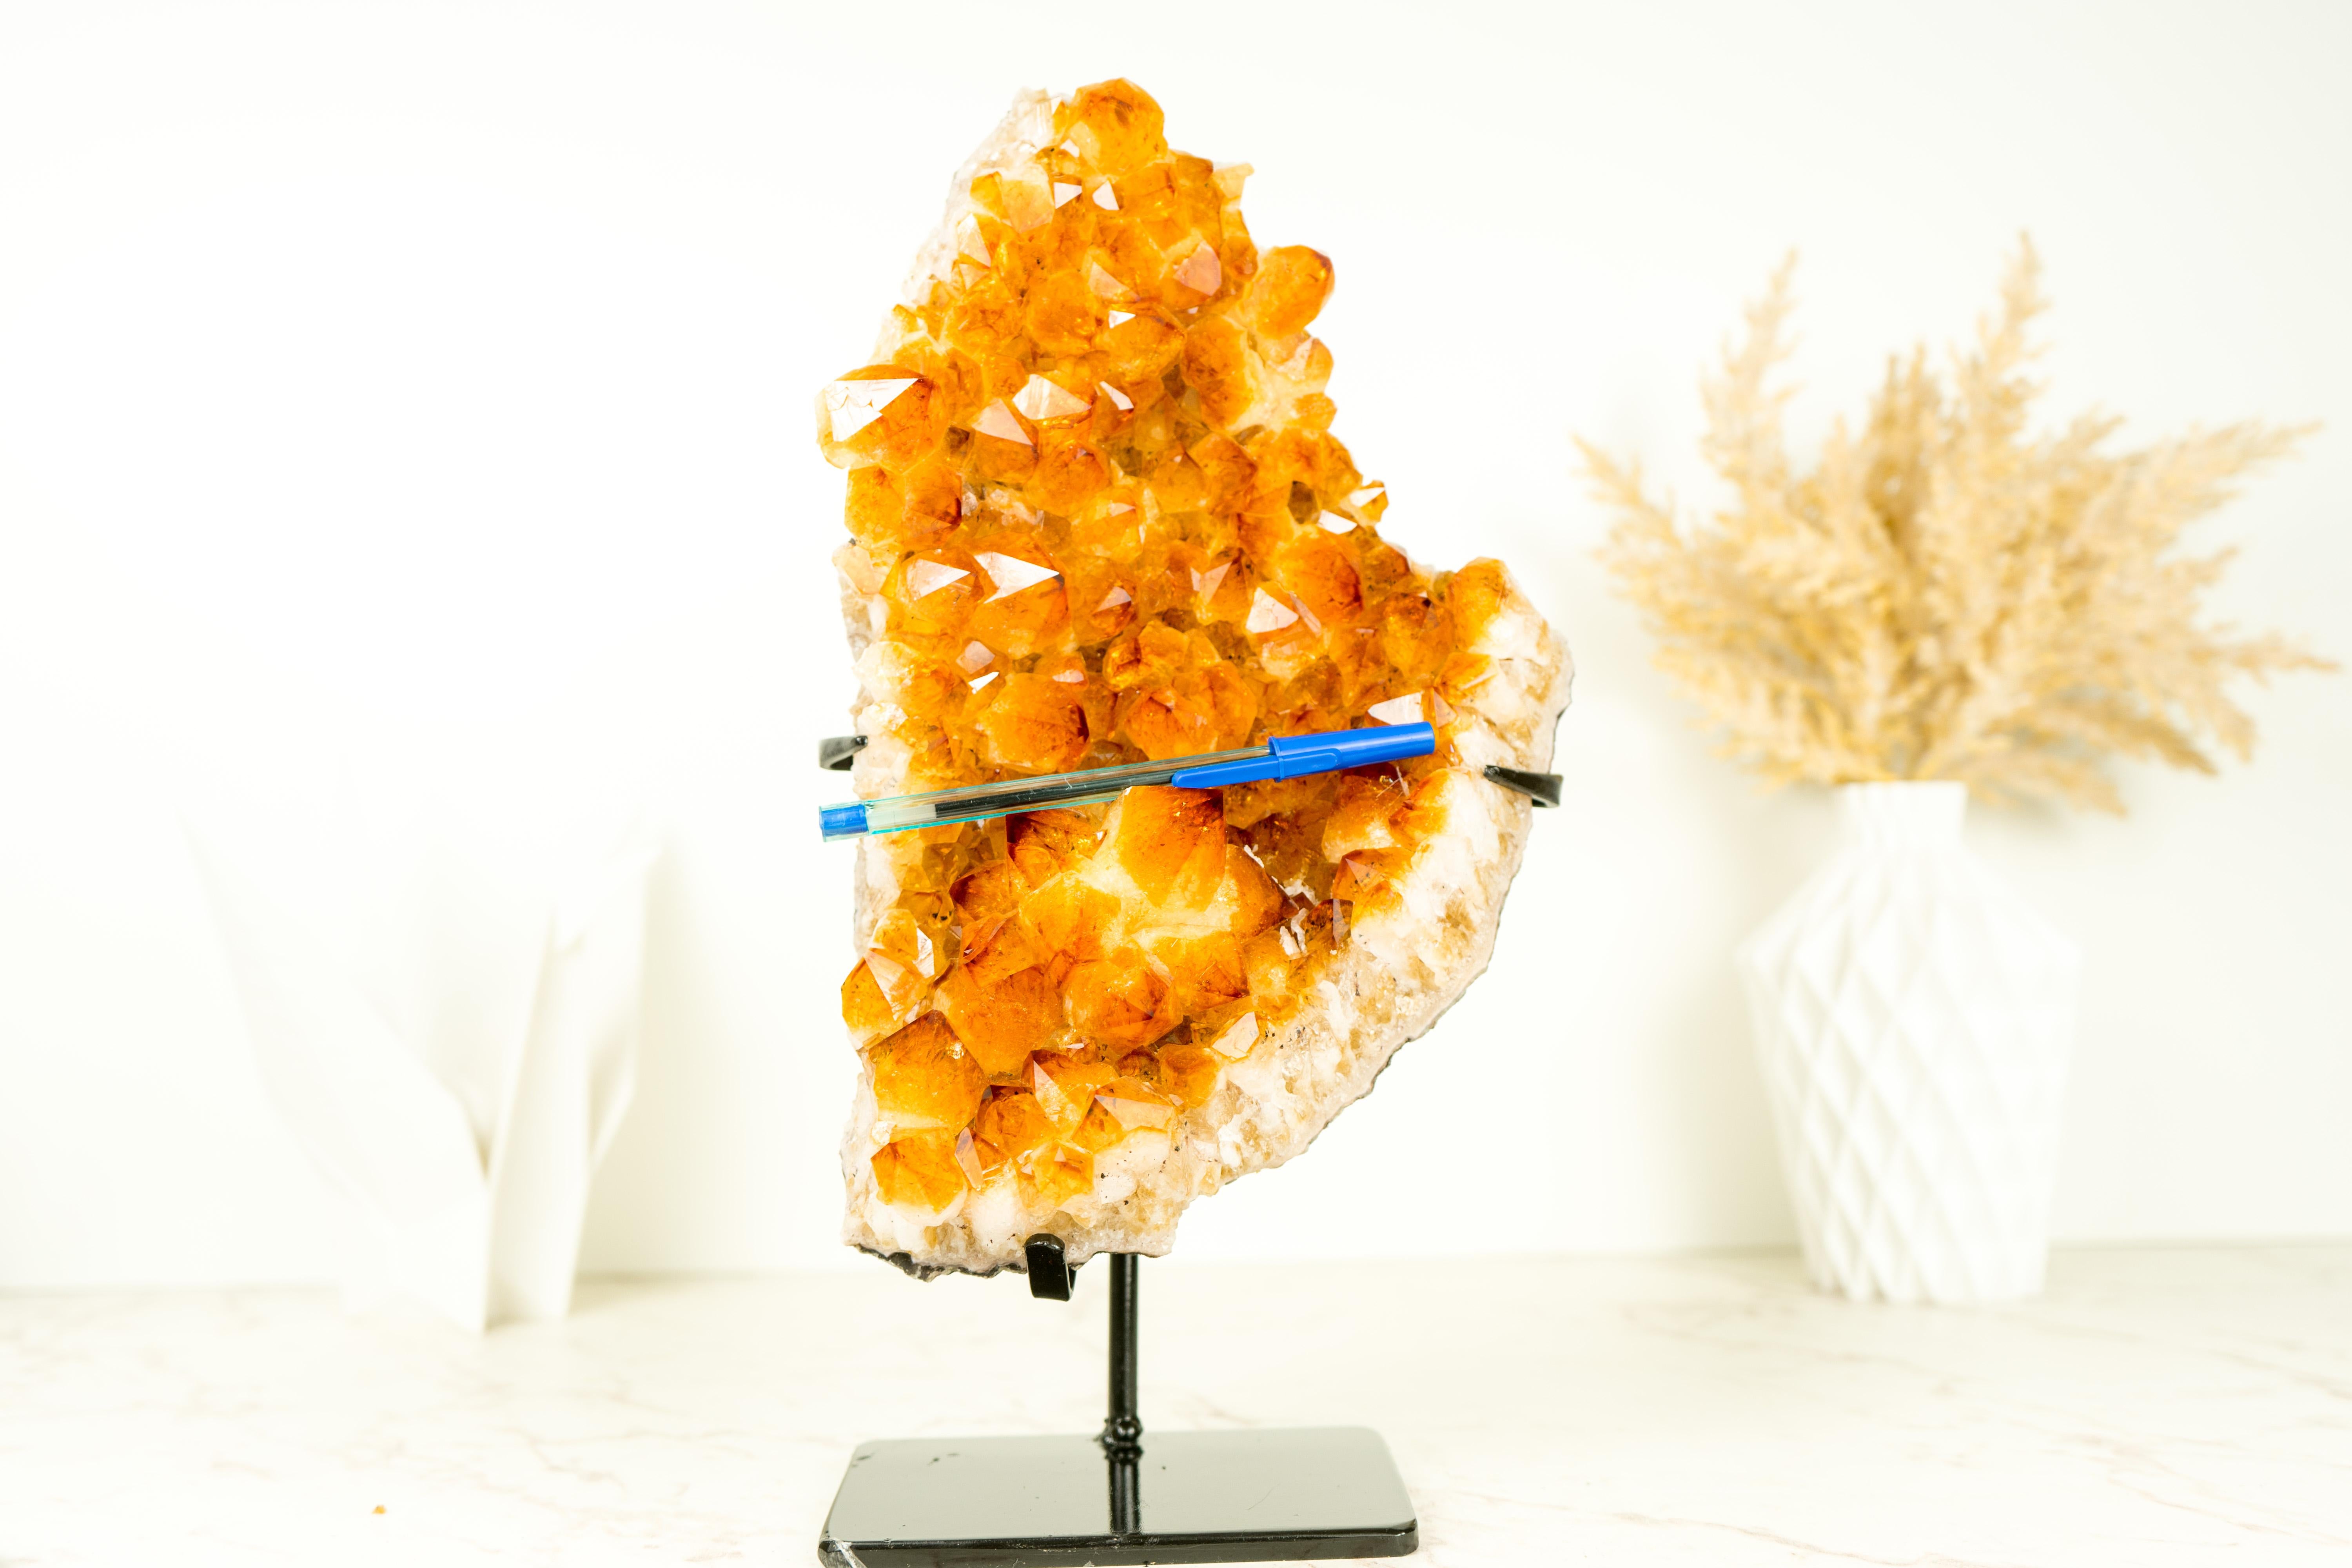 Introducing our high-grade Citrine Cluster, a beautiful Citrine Specimen, that showcases many special characteristics that will add to any space you decide to exhibit it. A prized addition to any gemstone collection or home decor, adding beautiful